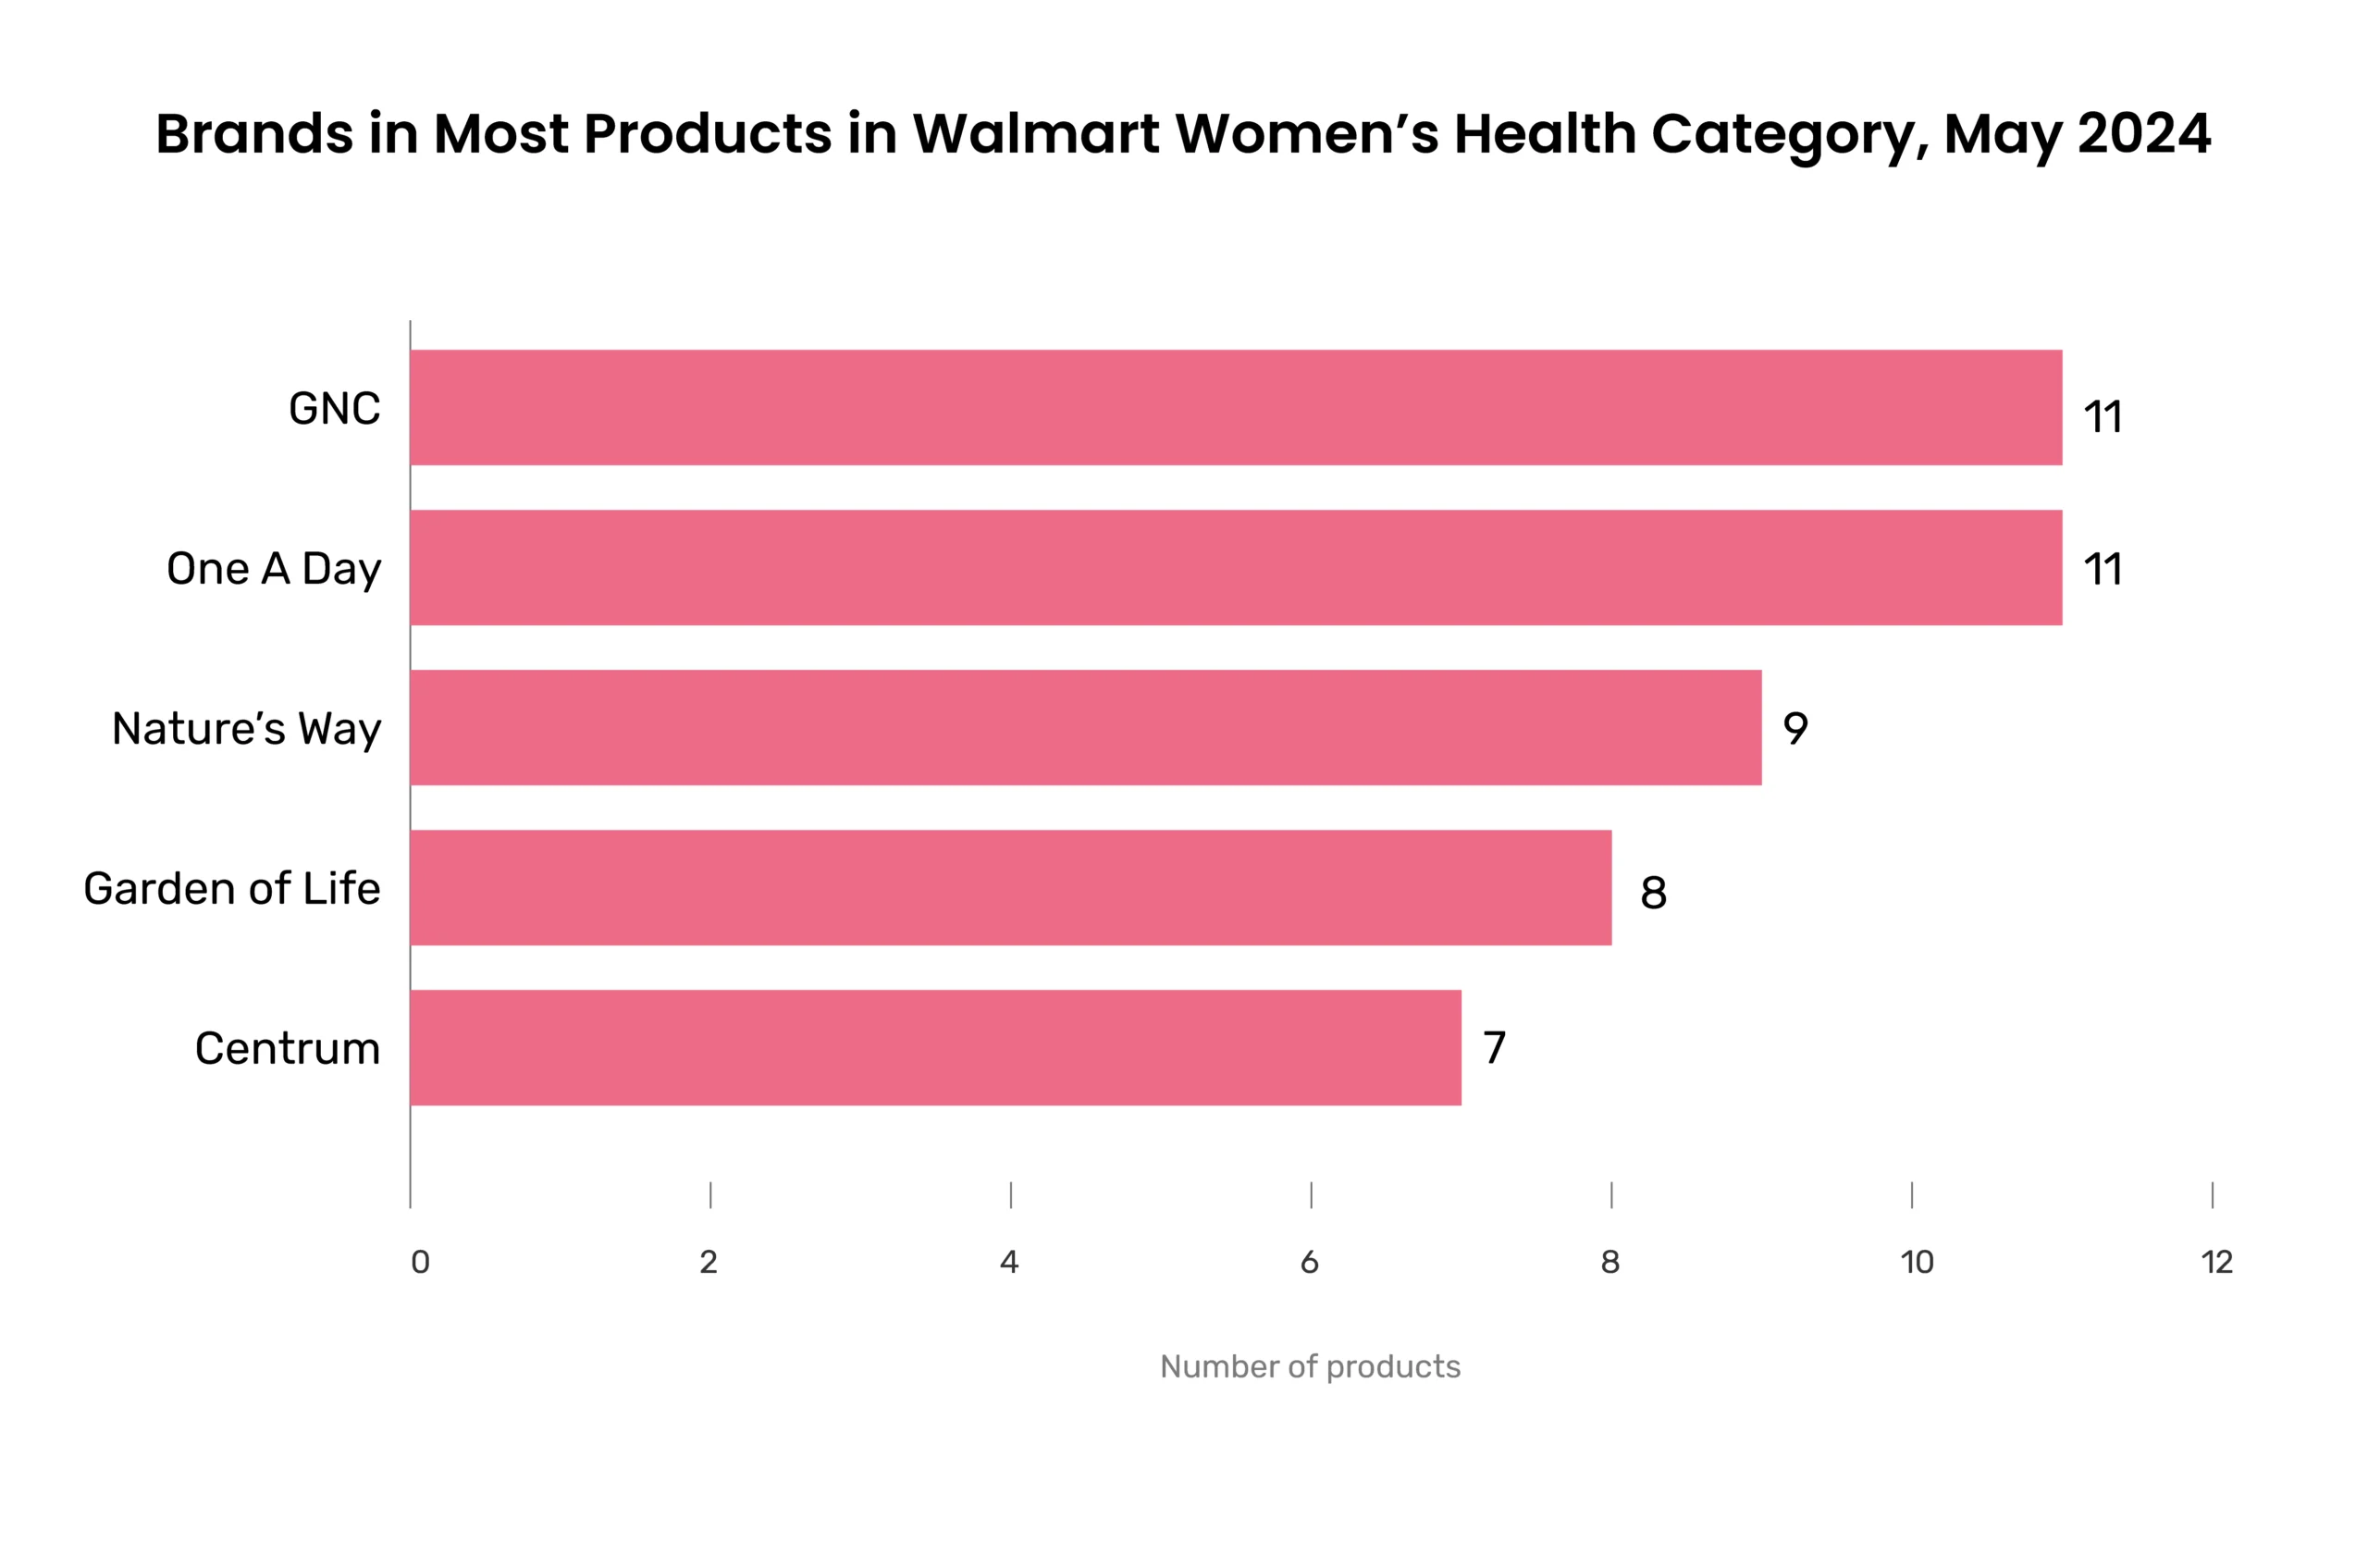 the brands with the most number of products in the women’s health category at Walmart in May 2024. 